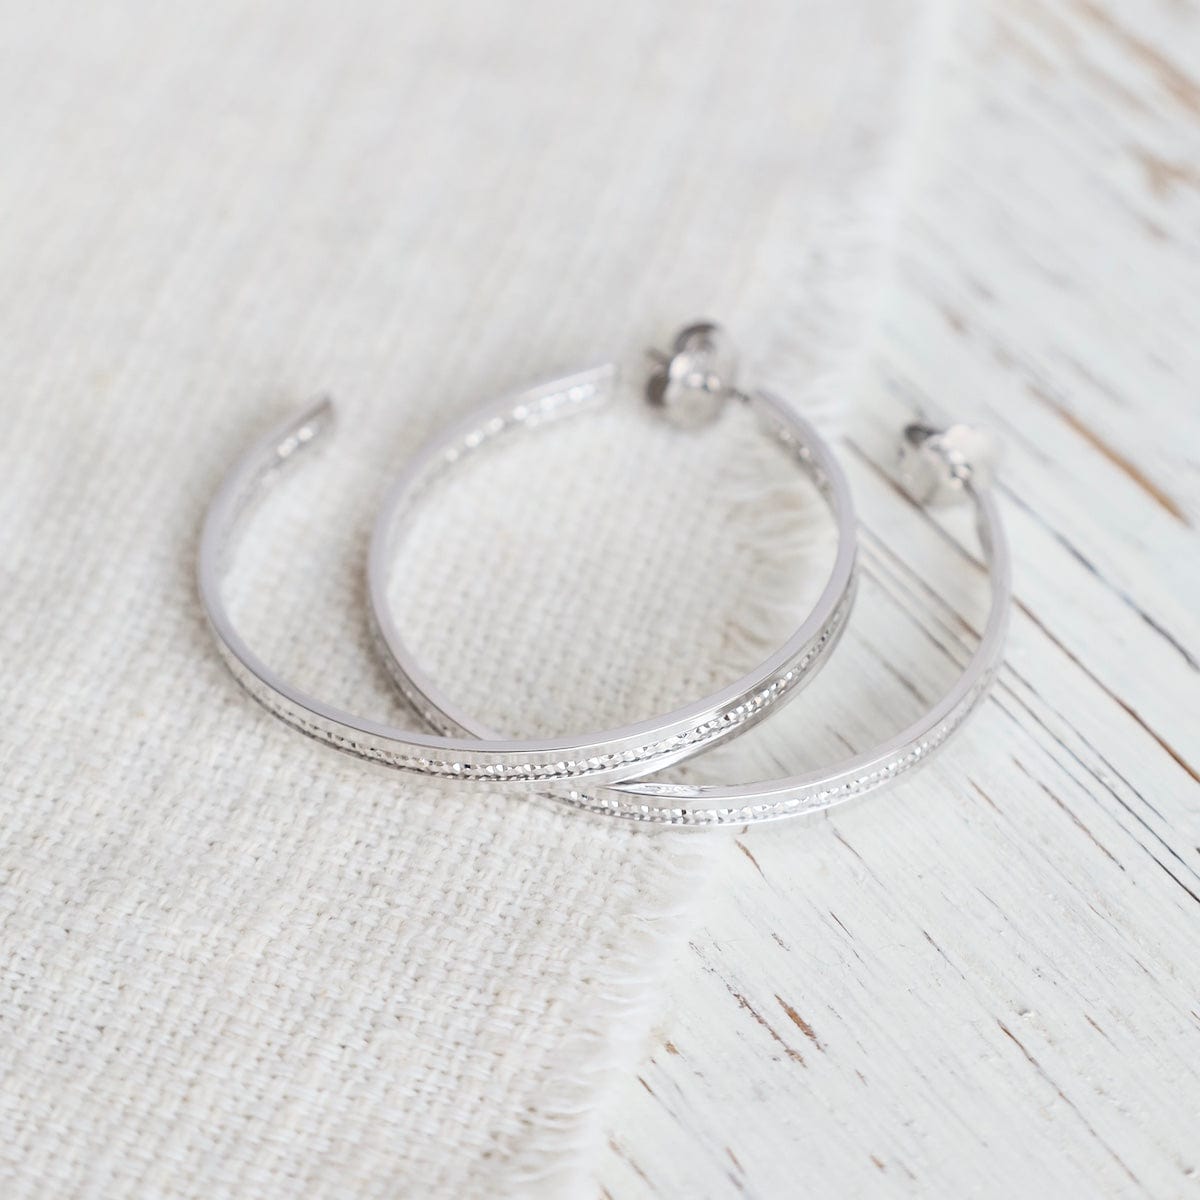 EAR Sterling Silver Extra Large Symphonic Hoops